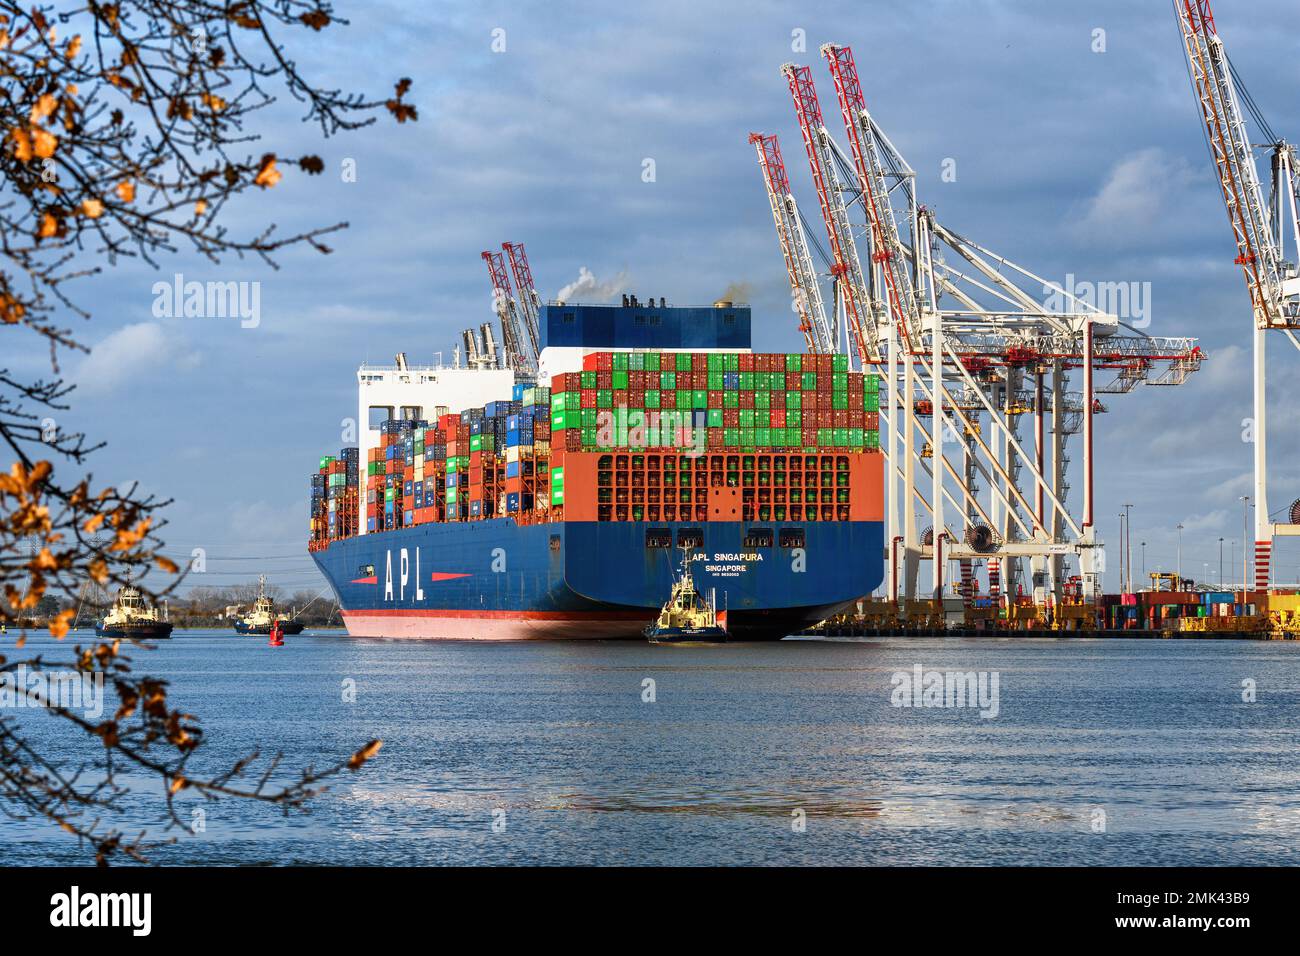 The CMA CGM container ship APL Singapura arriving at the Port of Southampton. Stock Photo